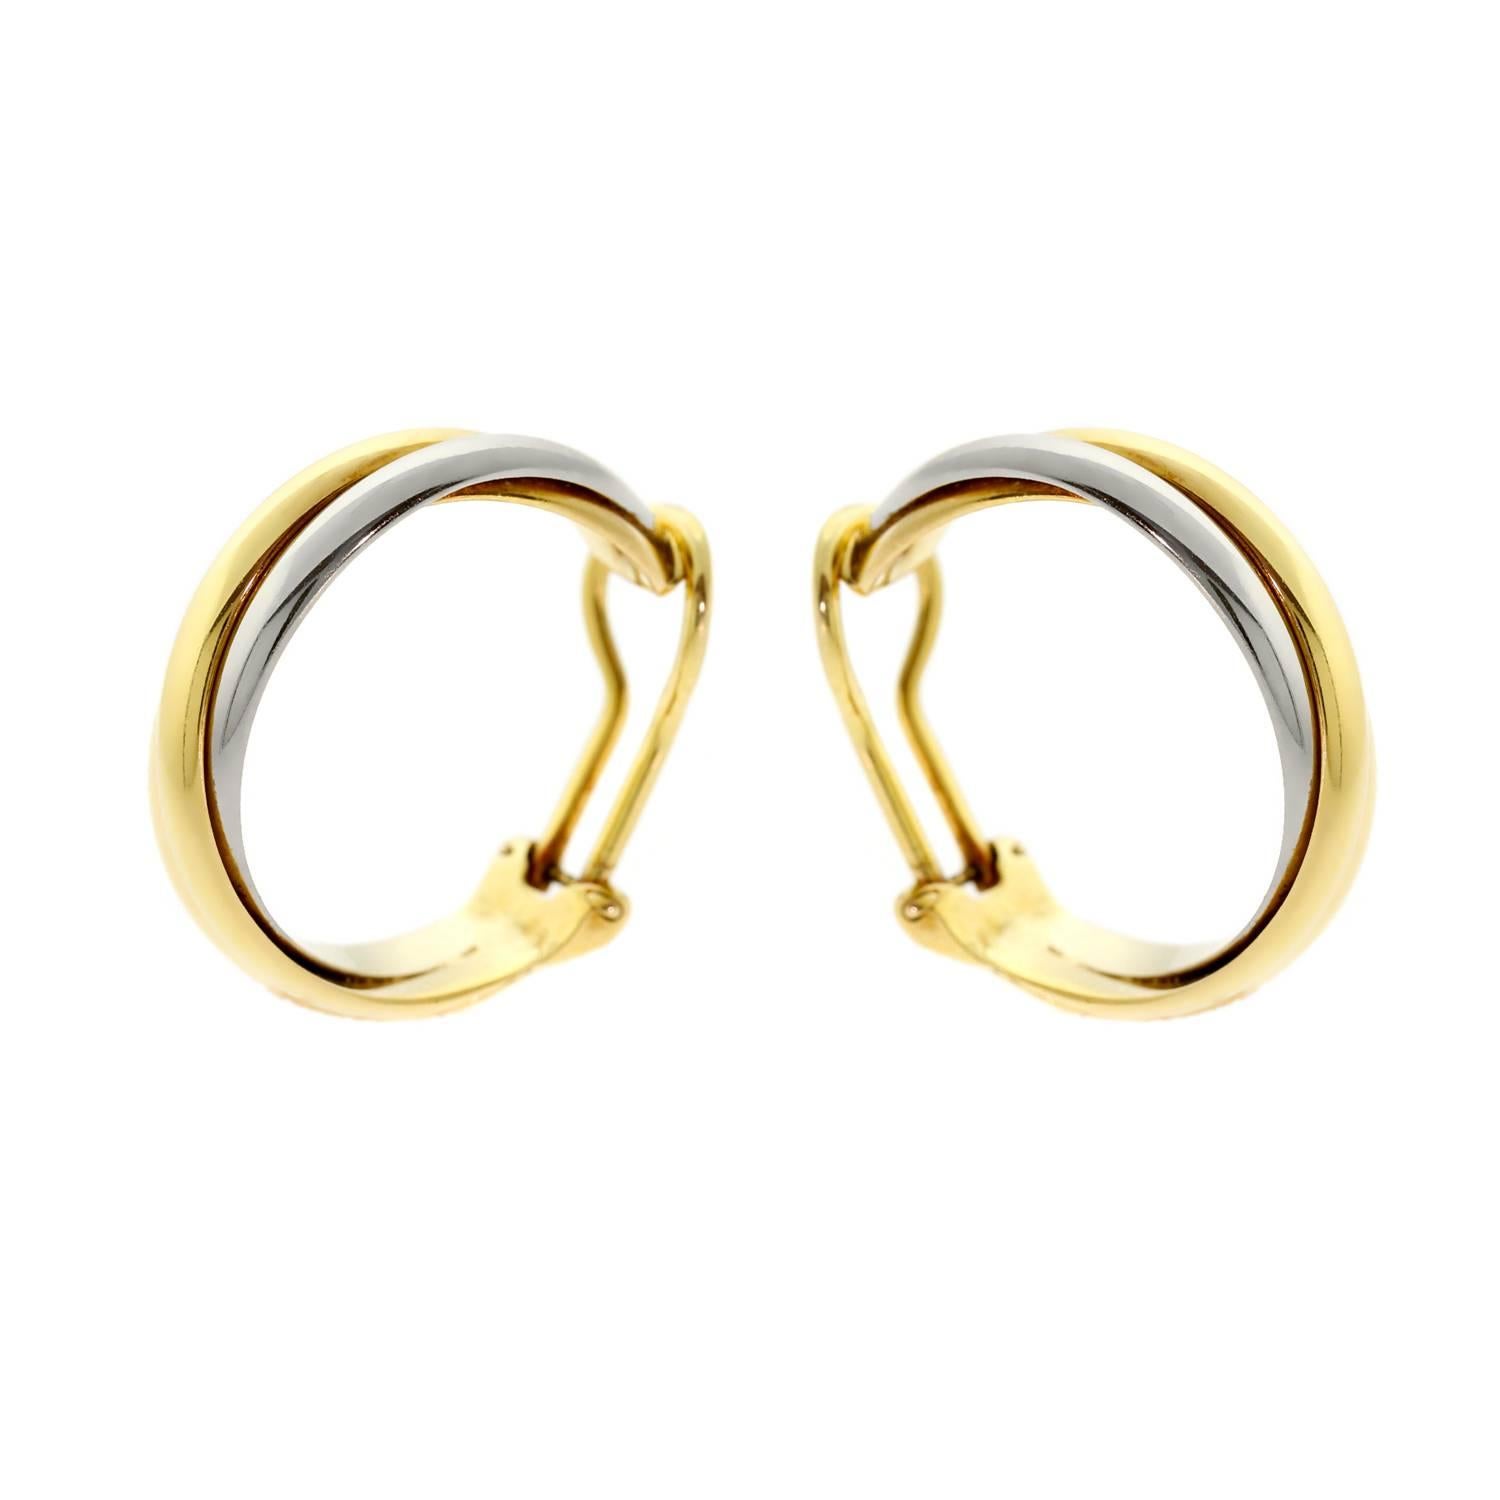 A timeless pair of authentic Cartier Trinity earrings featuring 18k white, yellow, and rose gold. The earrings measure .90" in diameter

Inventory ID: 0000519